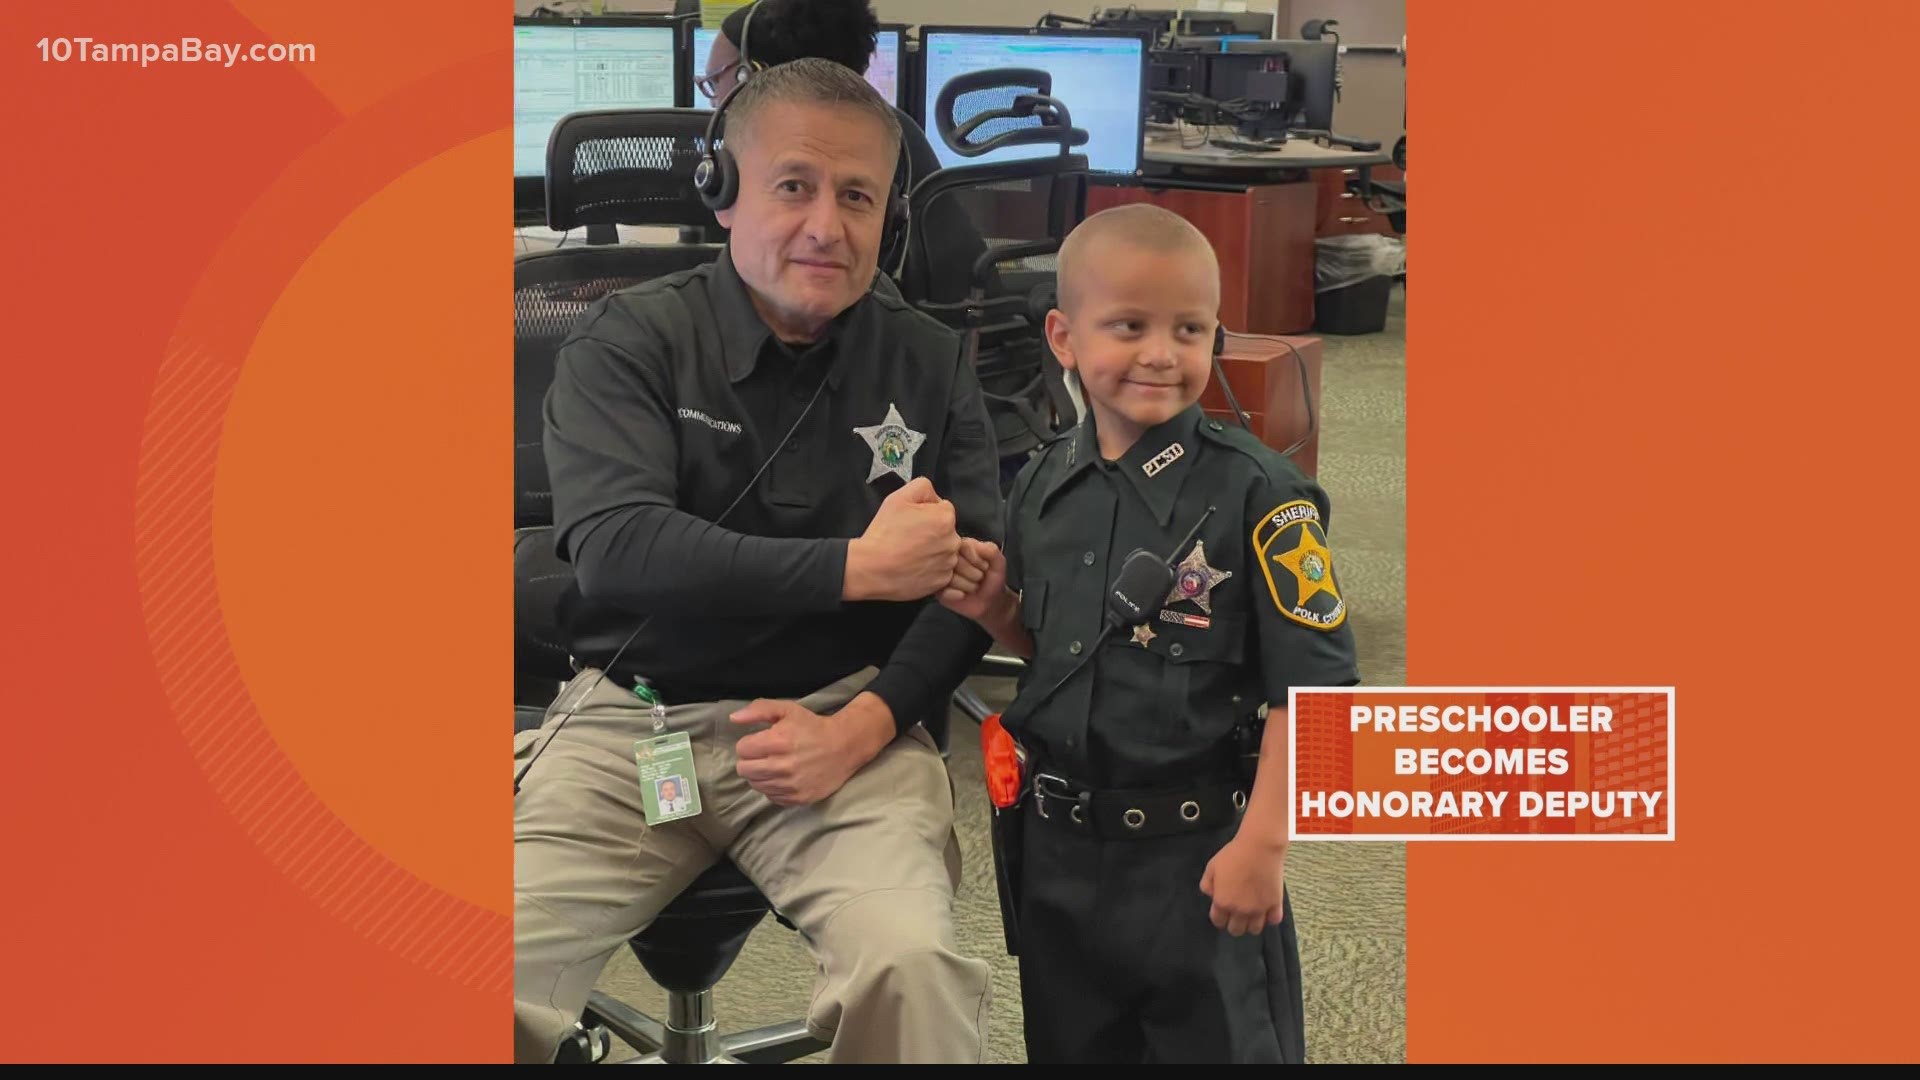 Merrick Loyd shared that he wants to be a sheriff one day. So, the community came together to make it happen.